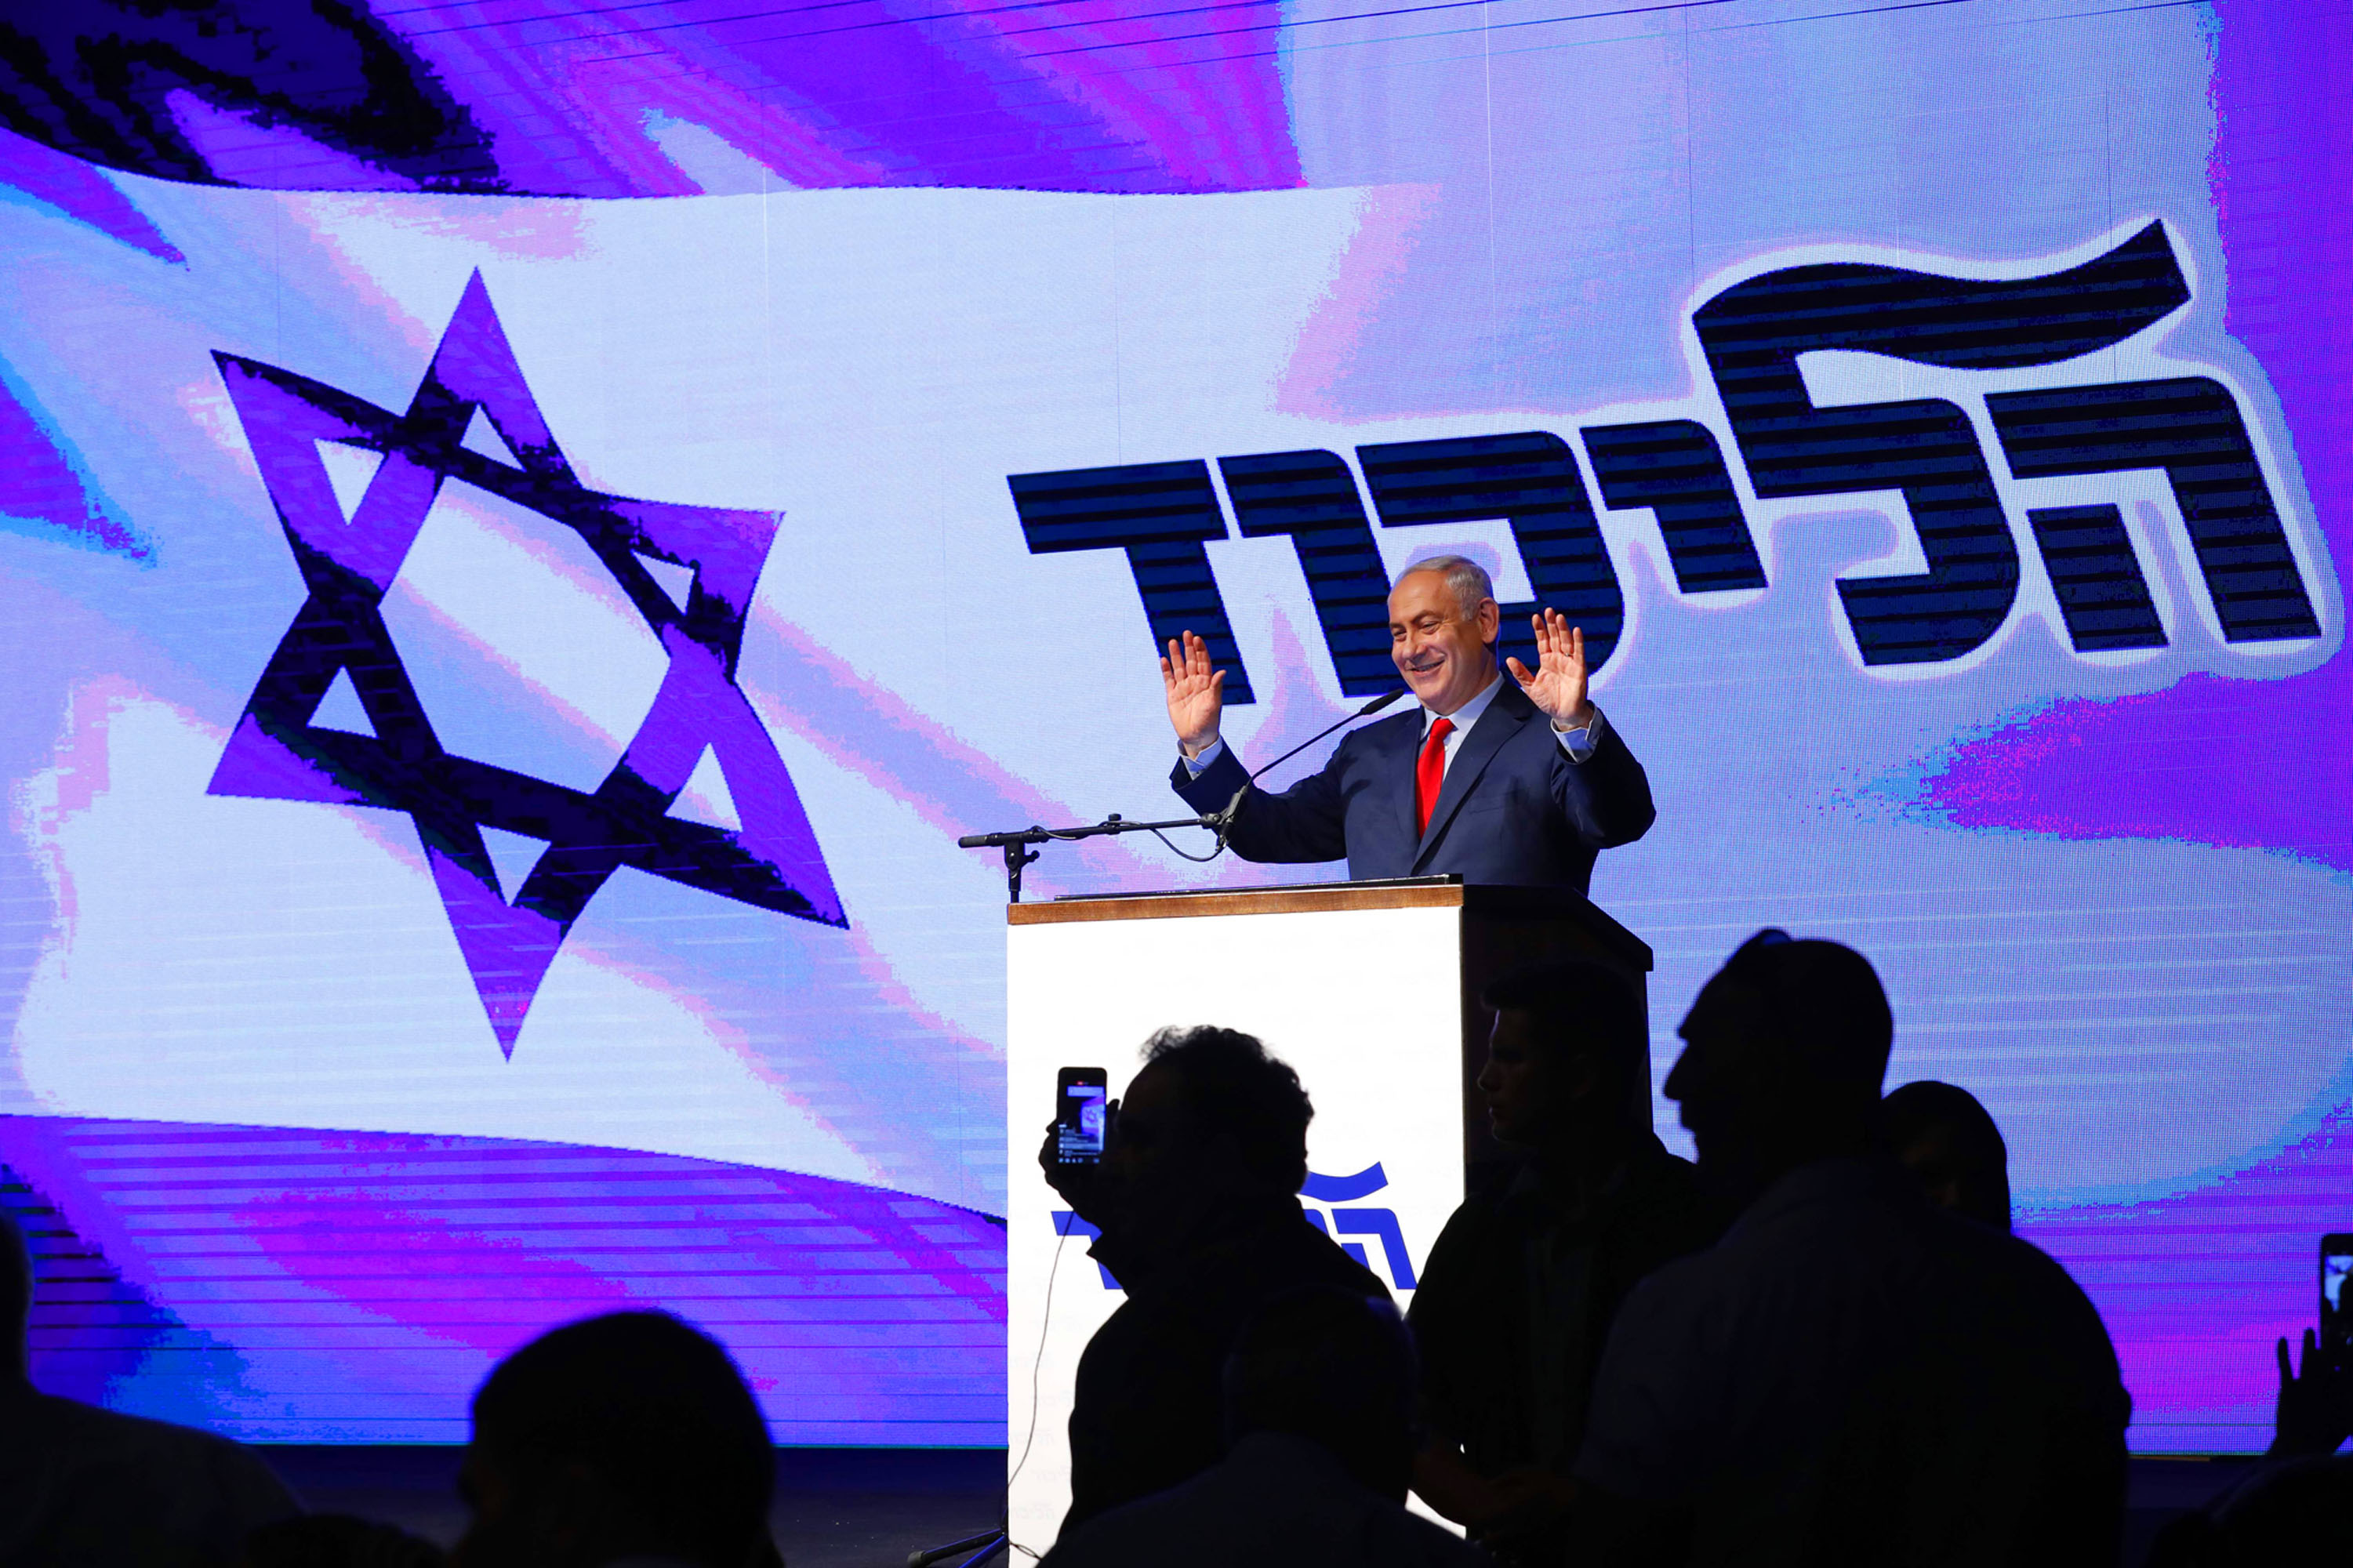 Benjamin Netanyahu delivers a speech during a gathering by Likud party members.